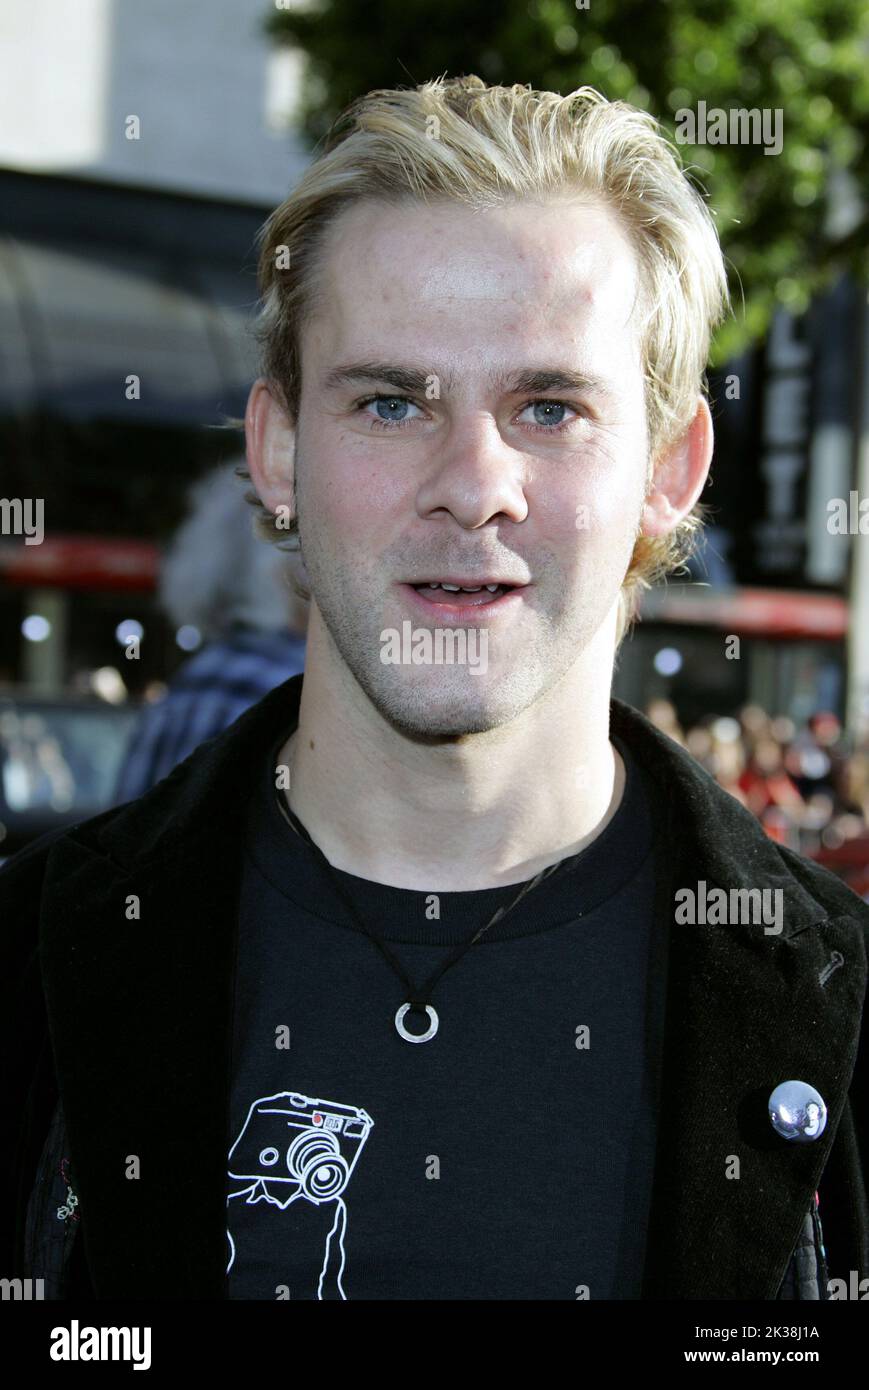 DOMINIC MONAGHAN ACTOR BATMAN BEGINS CHINESE THEATRE, HOLLYWOOD LOS ANGELES, USA 06/06/2005 LAM51580 Stock Photo